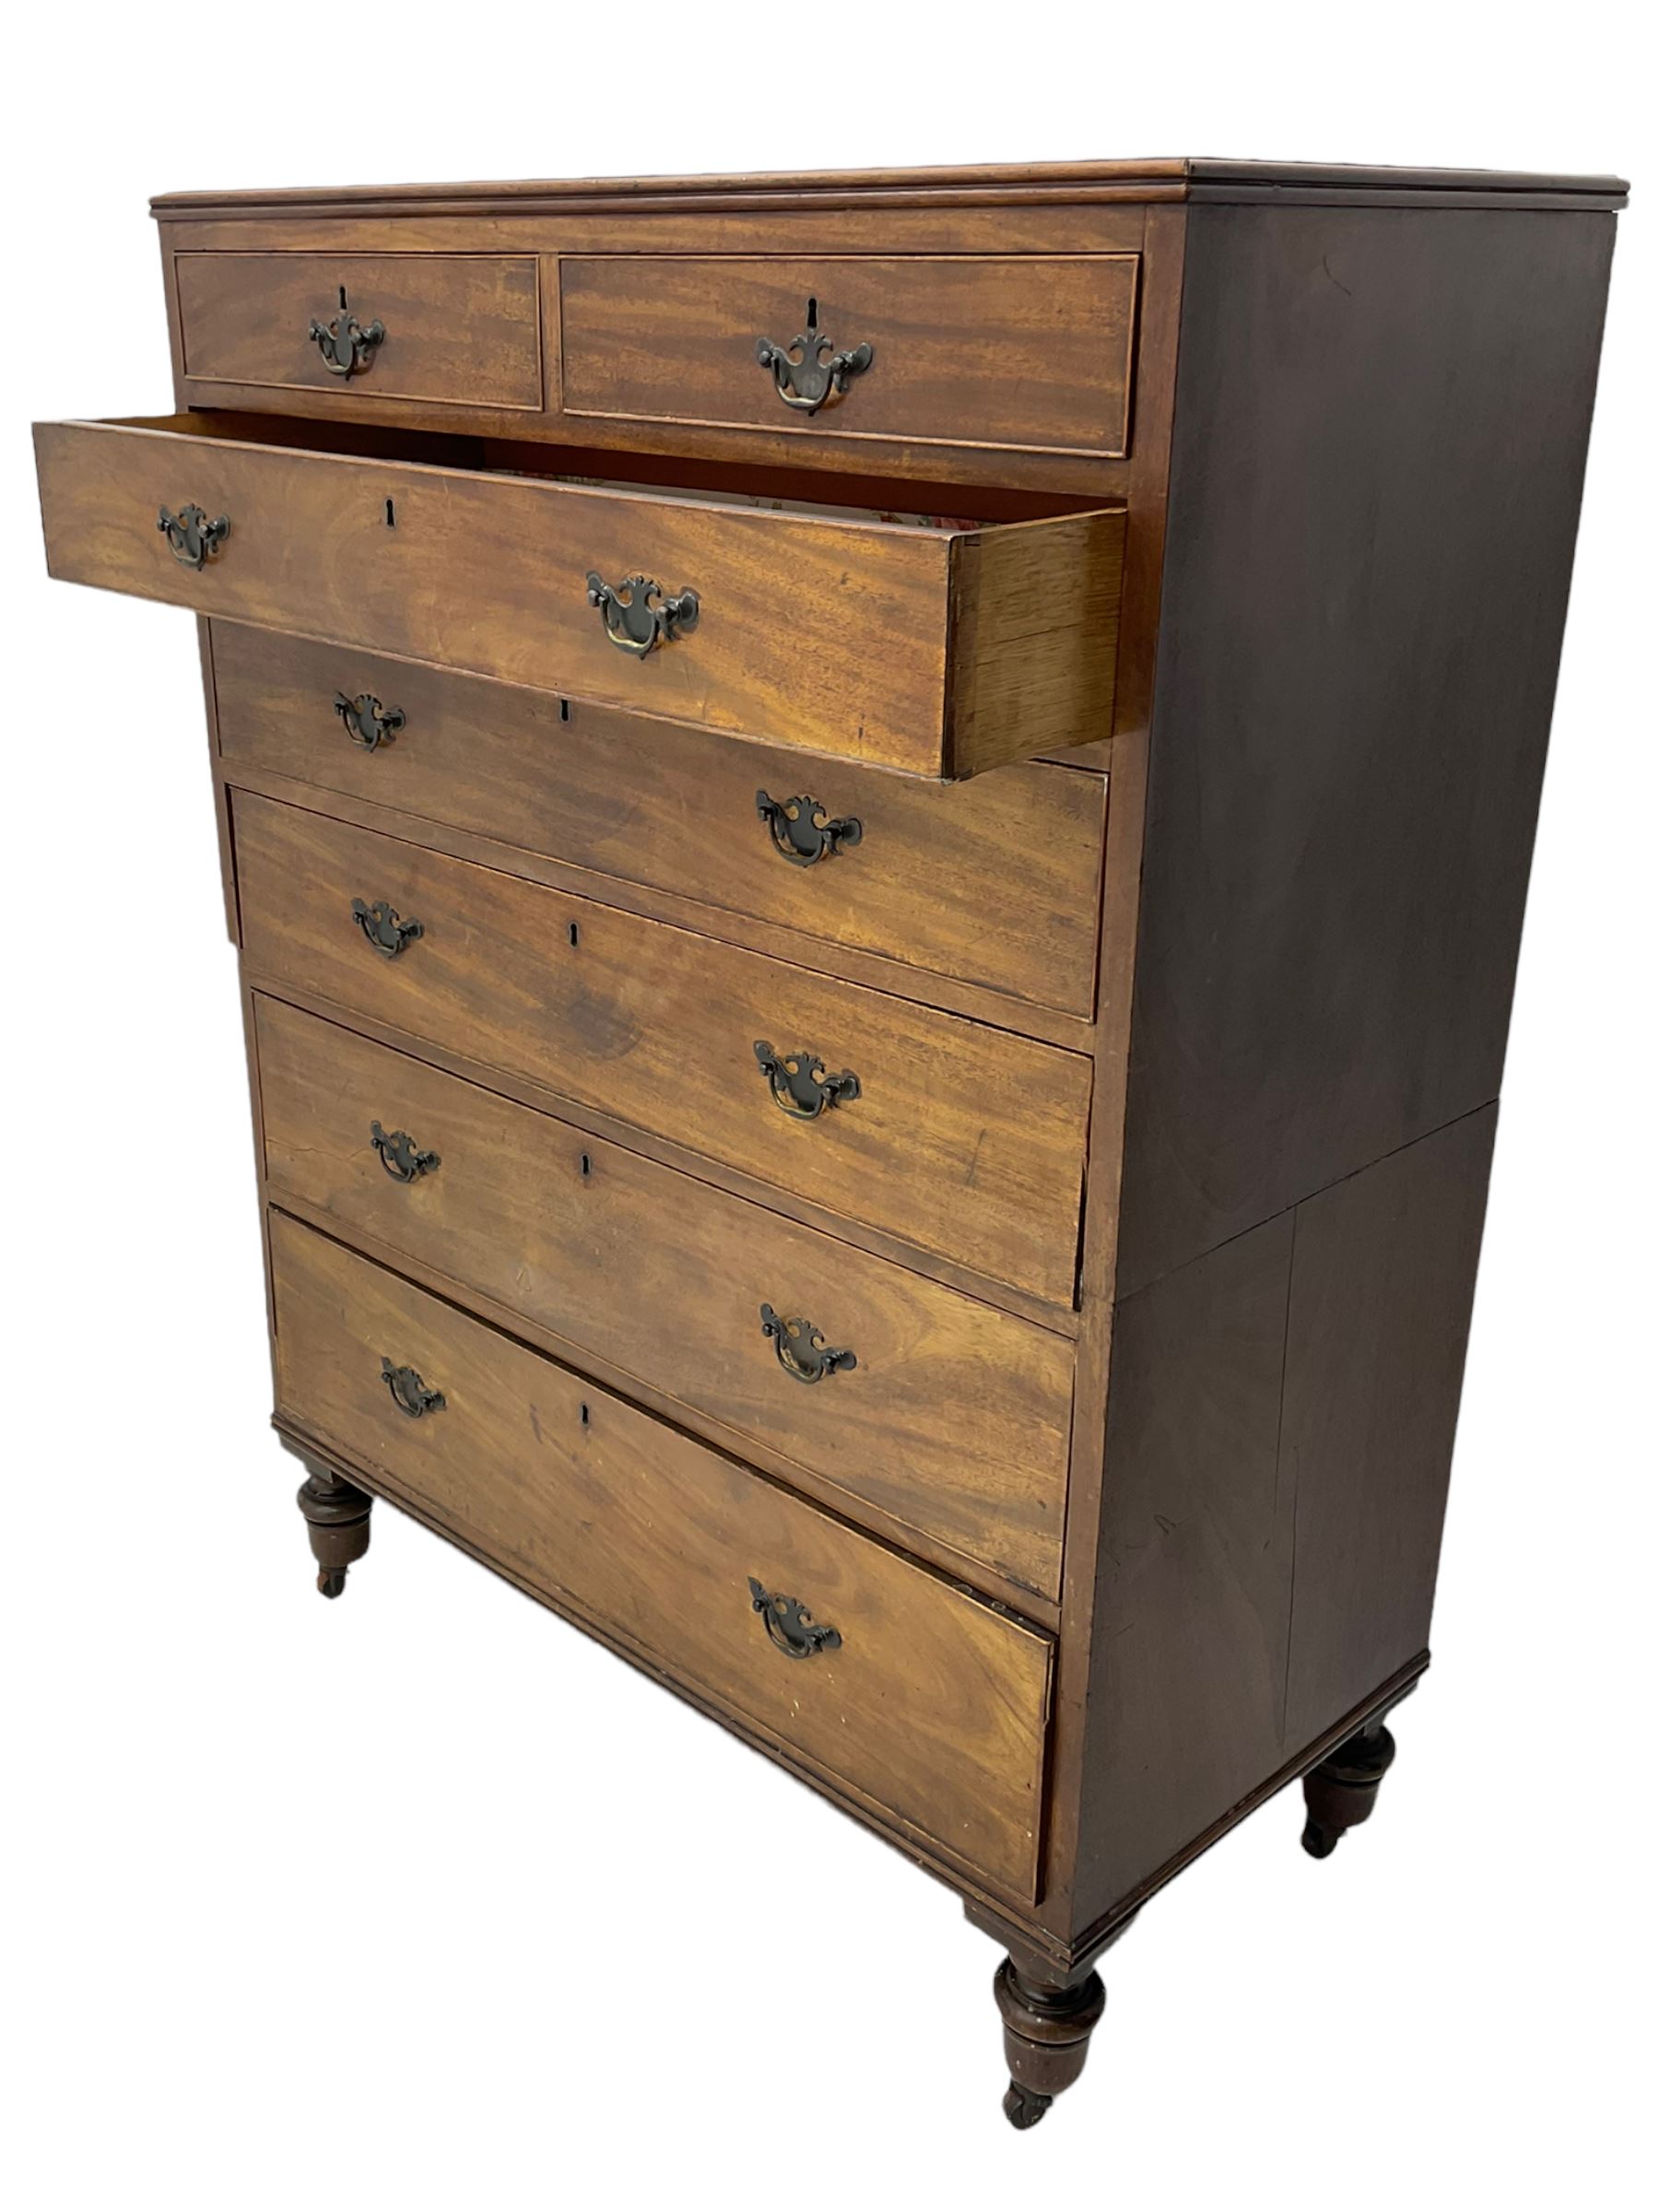 19th century mahogany straight front chest - Image 7 of 8